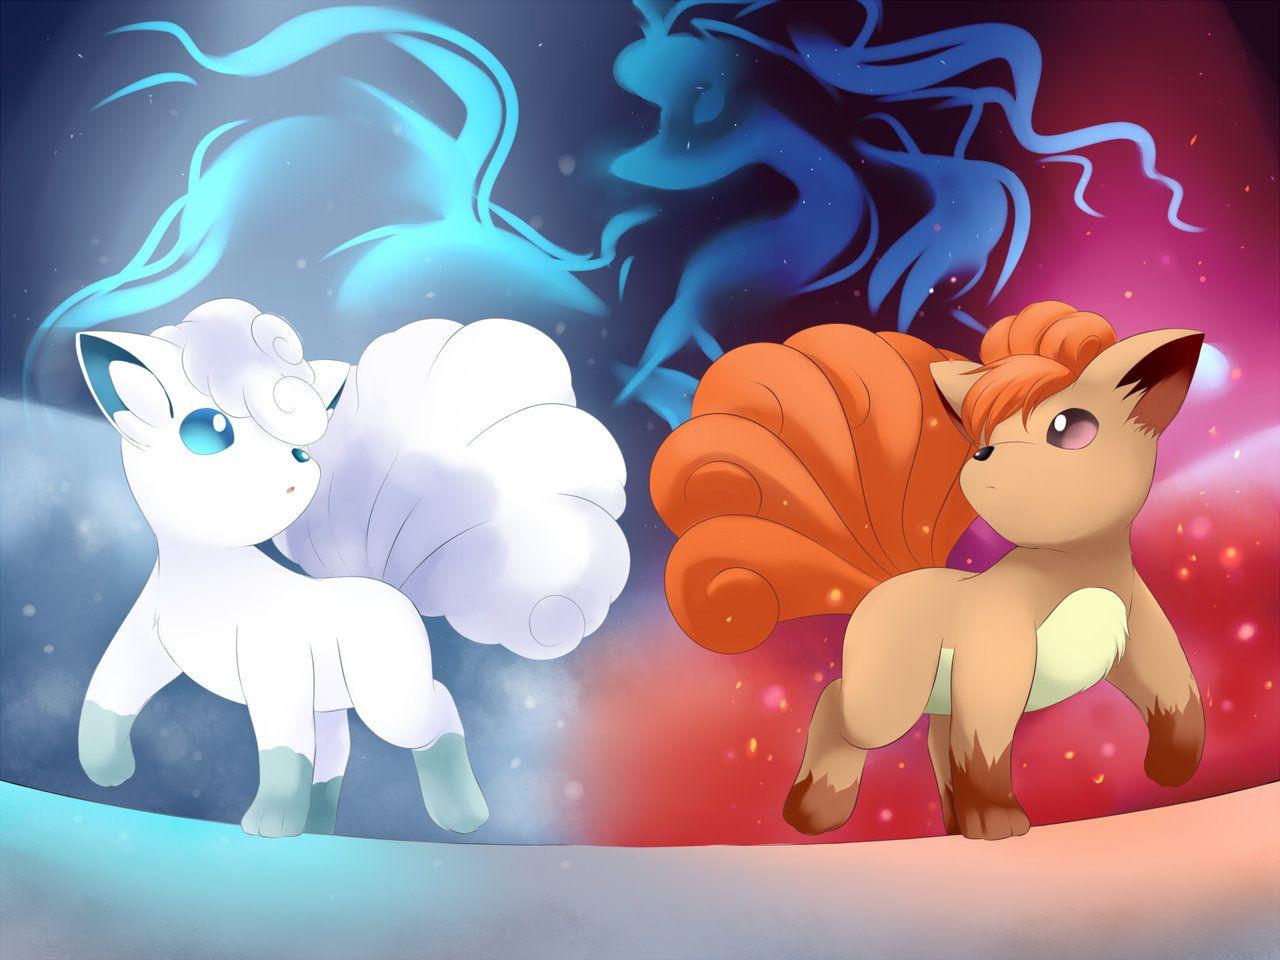 when_fire_meets_ice__the_path_of_vulpix_by_yomitrooper